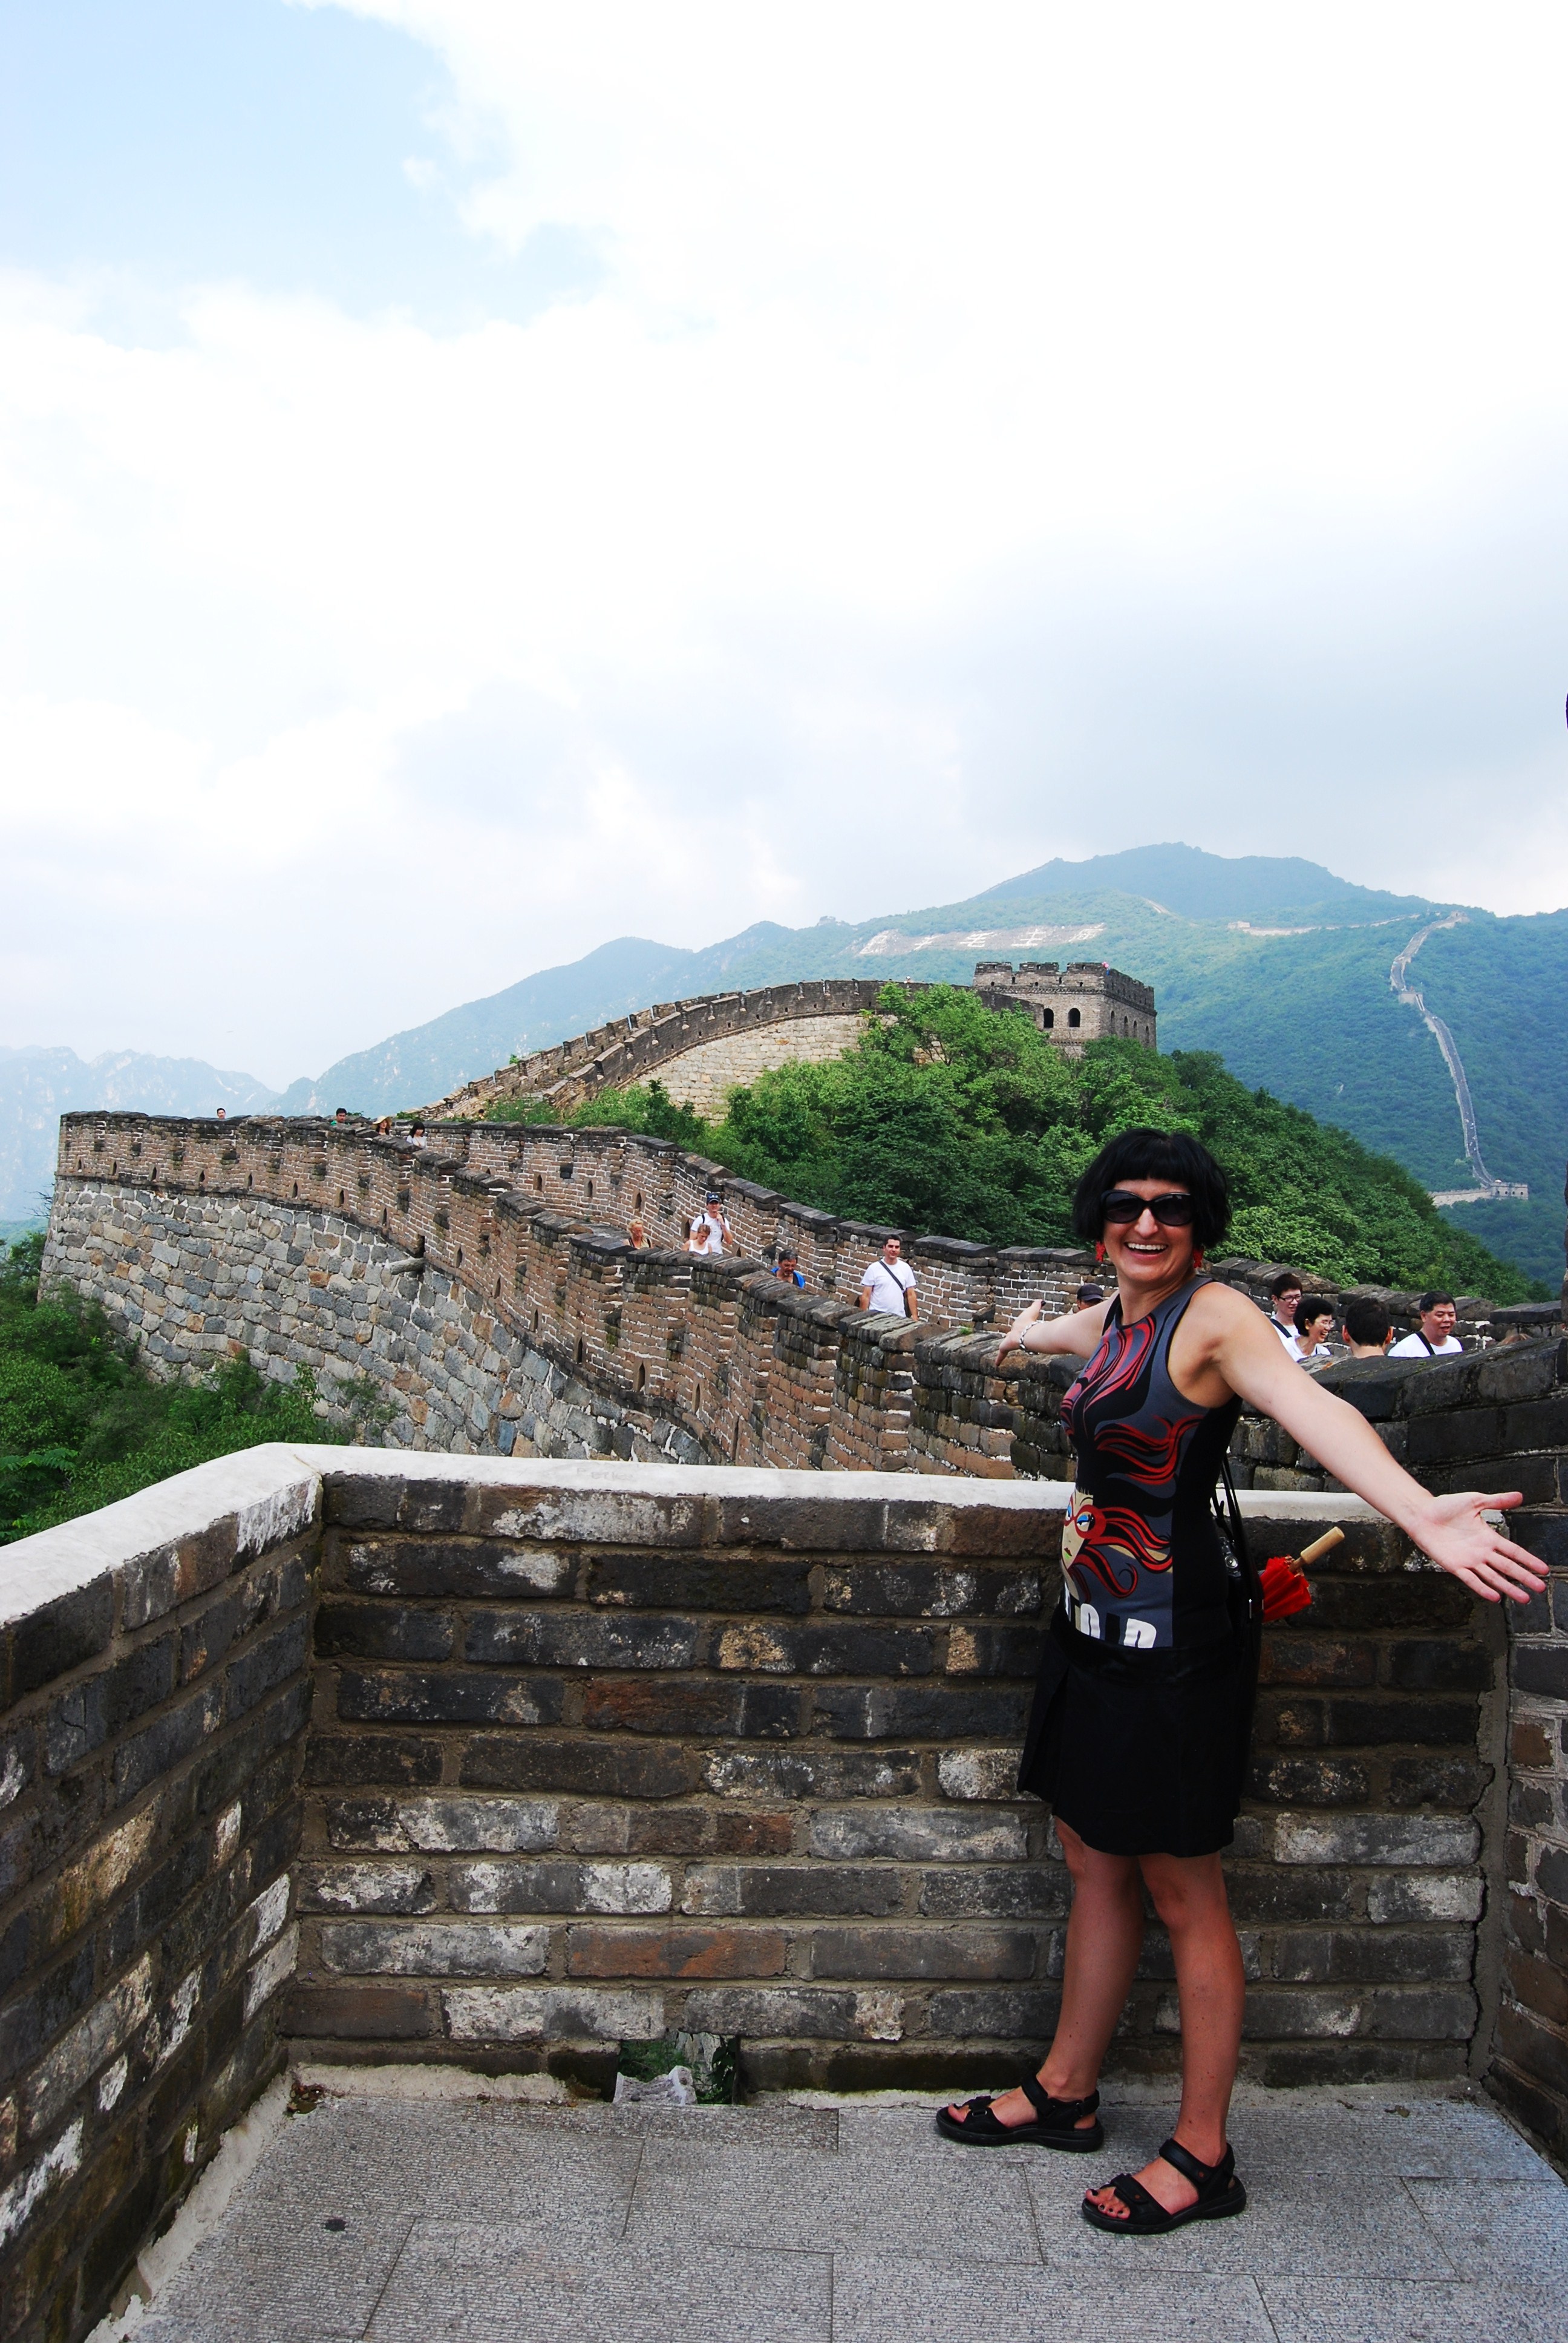 Me on The Great Wall, China